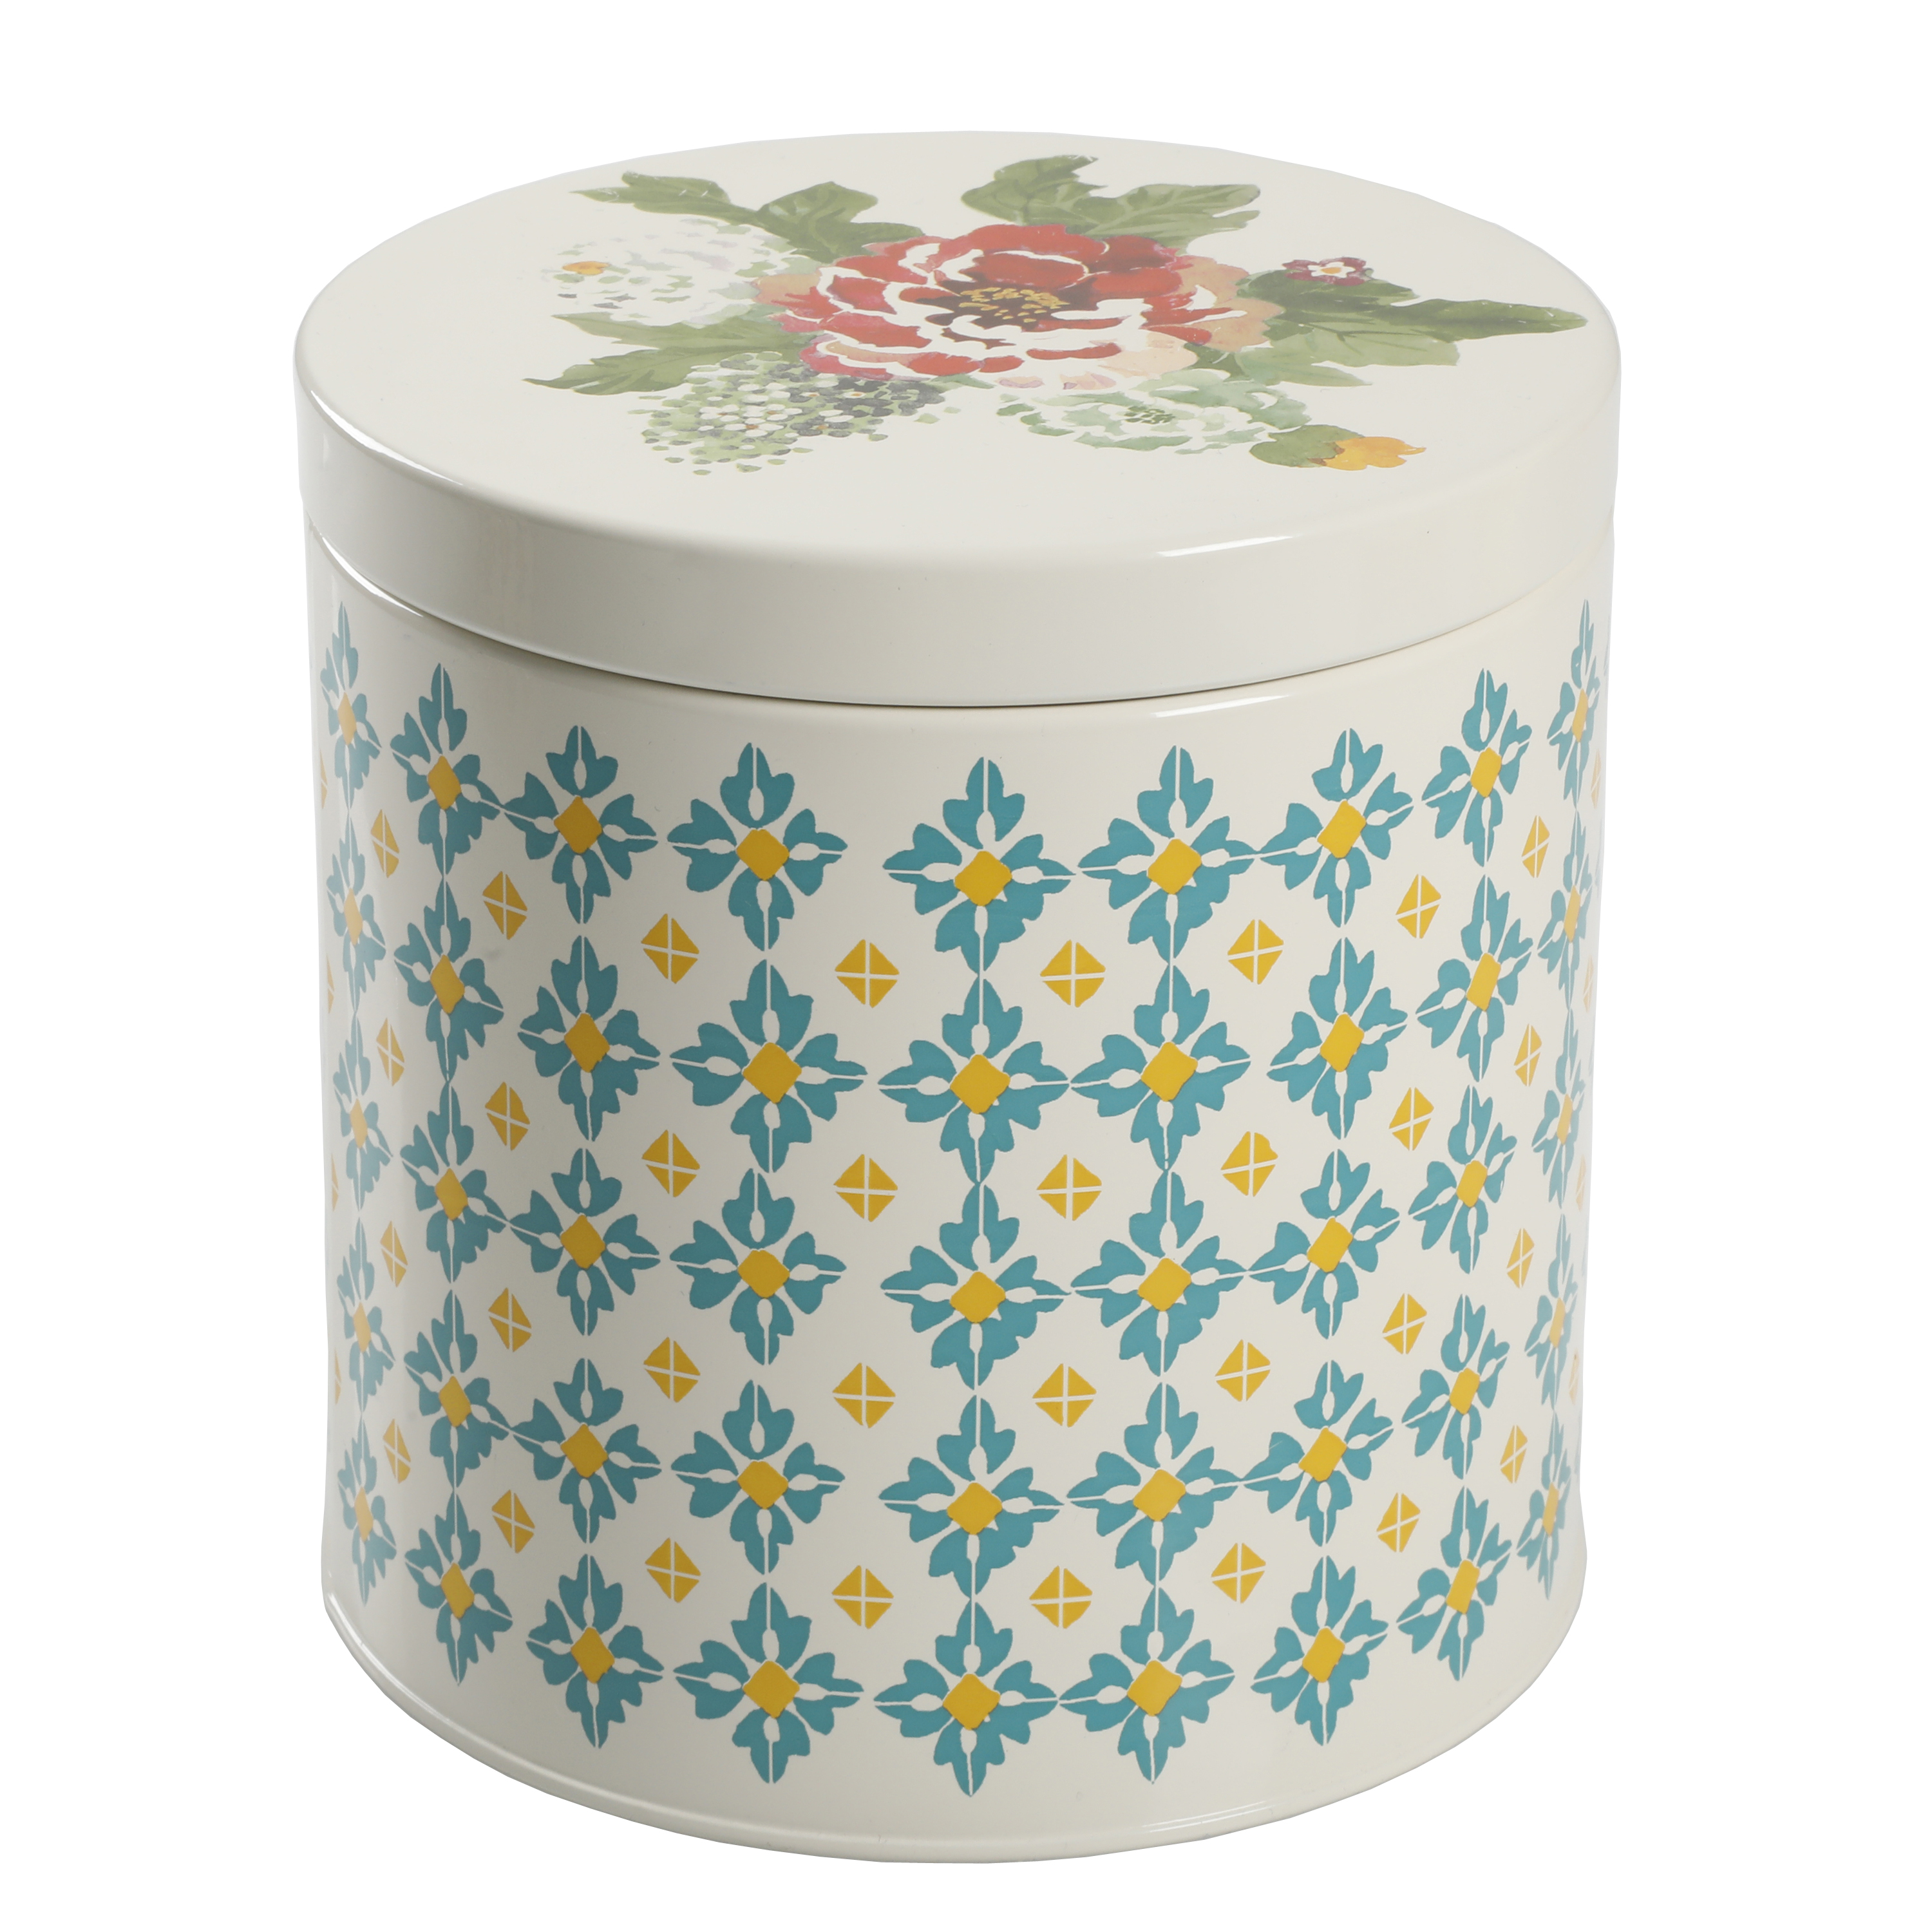 The Pioneer Woman Vintage Geo 3-Piece Canister Set - image 4 of 6